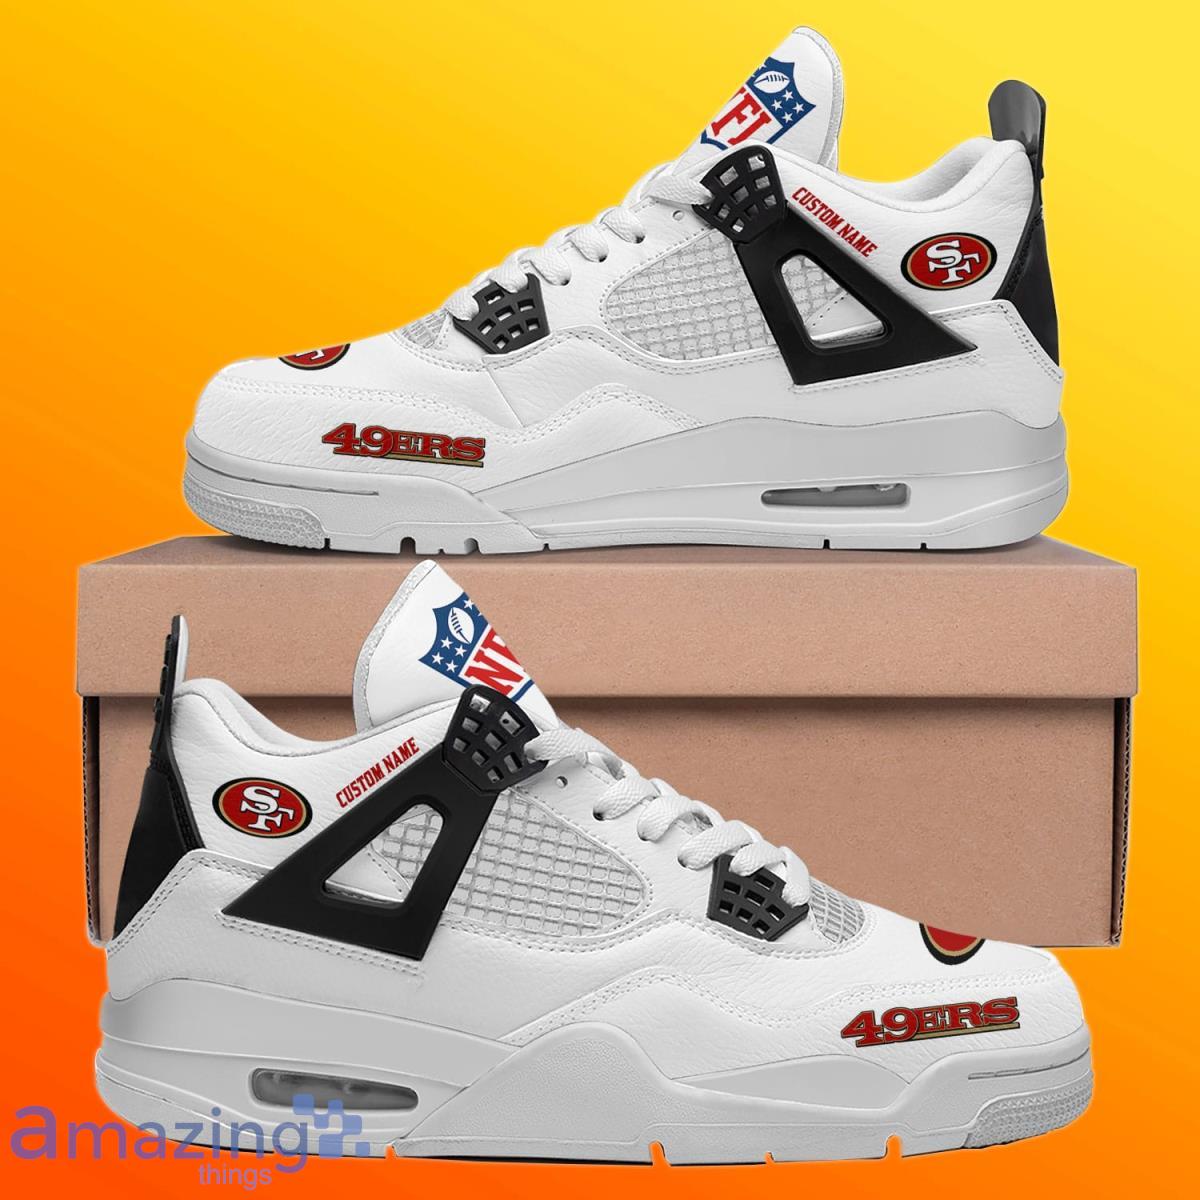 San Francisco 49ers Red Camouflage Personalized Air Jordan 4 Shoes - The  Clothes You'll Ever Need